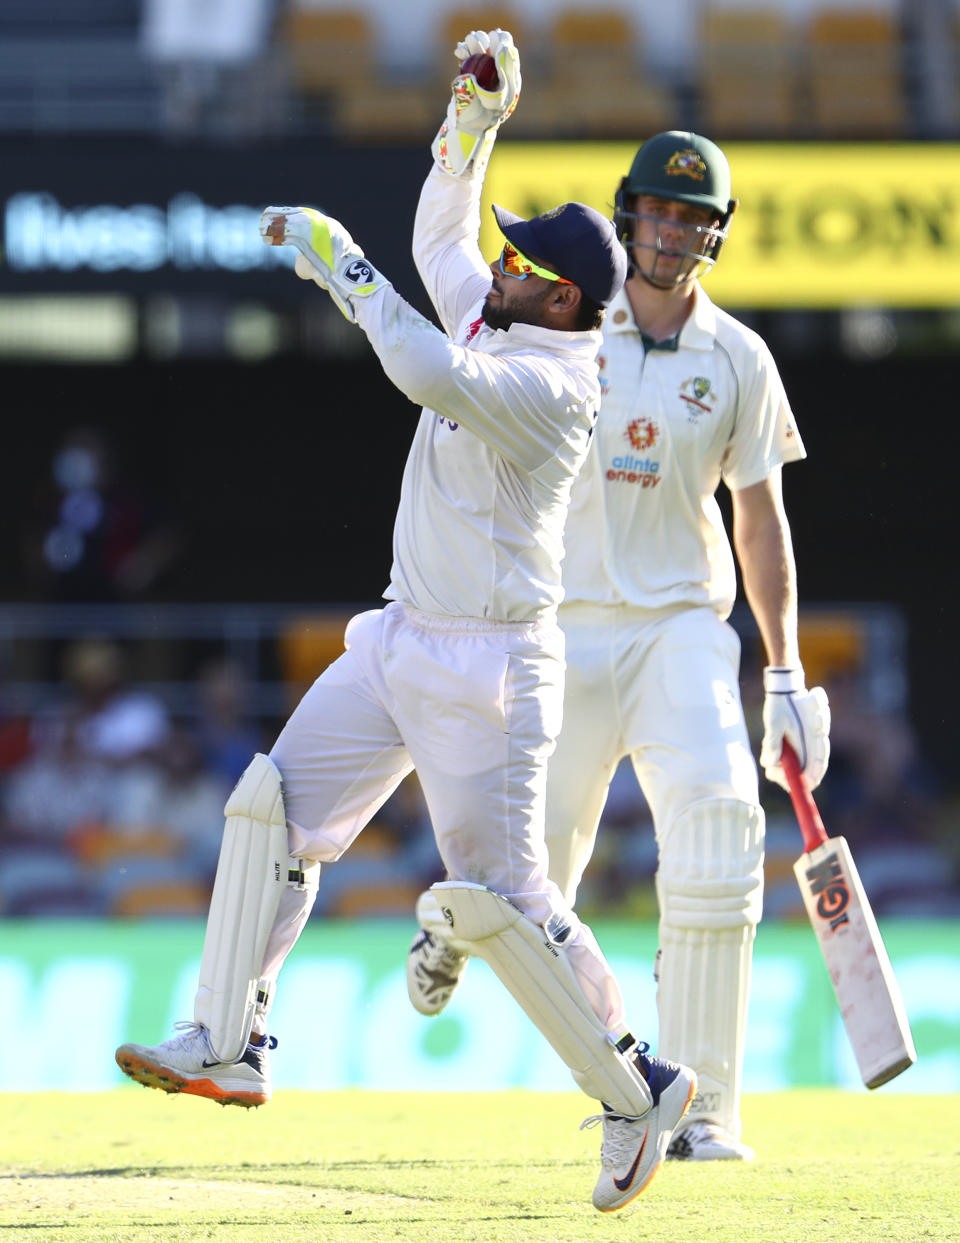 India's wicketkeeper Rishabh Pant catches the ball during play on the first day of the fourth cricket test between India and Australia at the Gabba, Brisbane, Australia, Friday, Jan. 15, 2021. (AP Photo/Tertius Pickard)